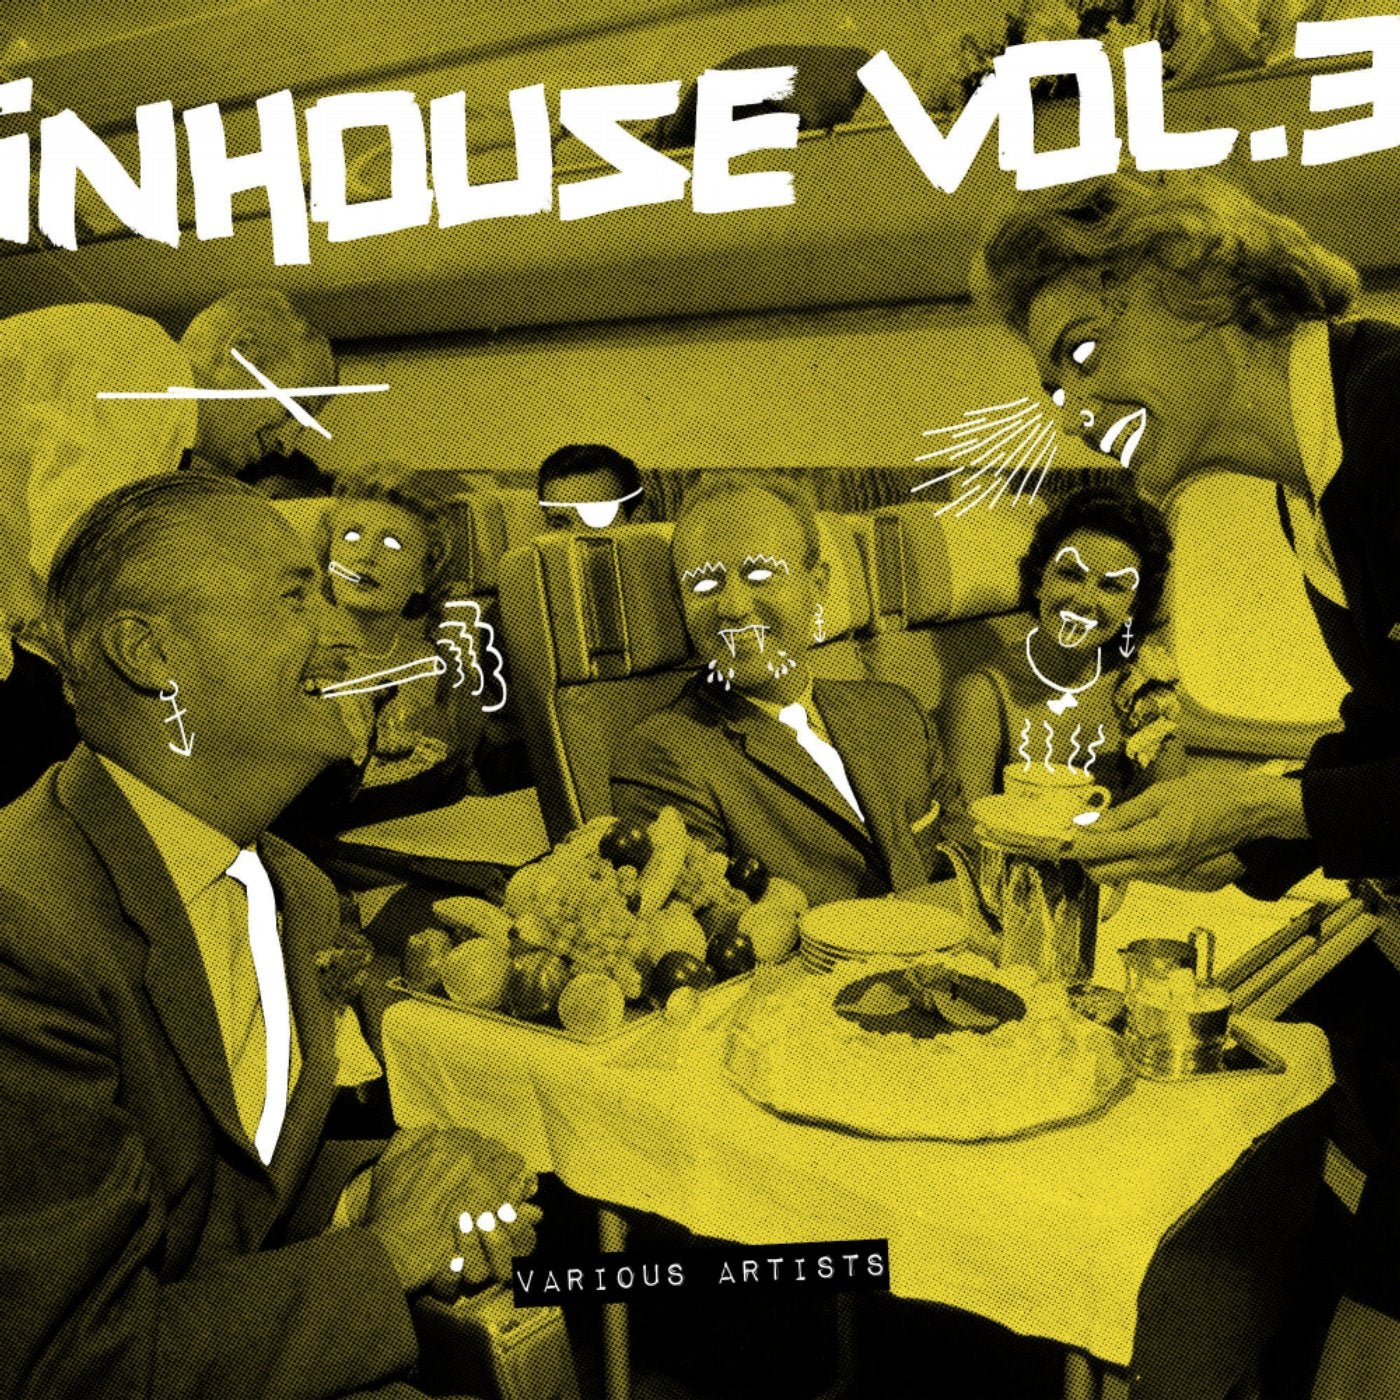 In House, Vol. 3